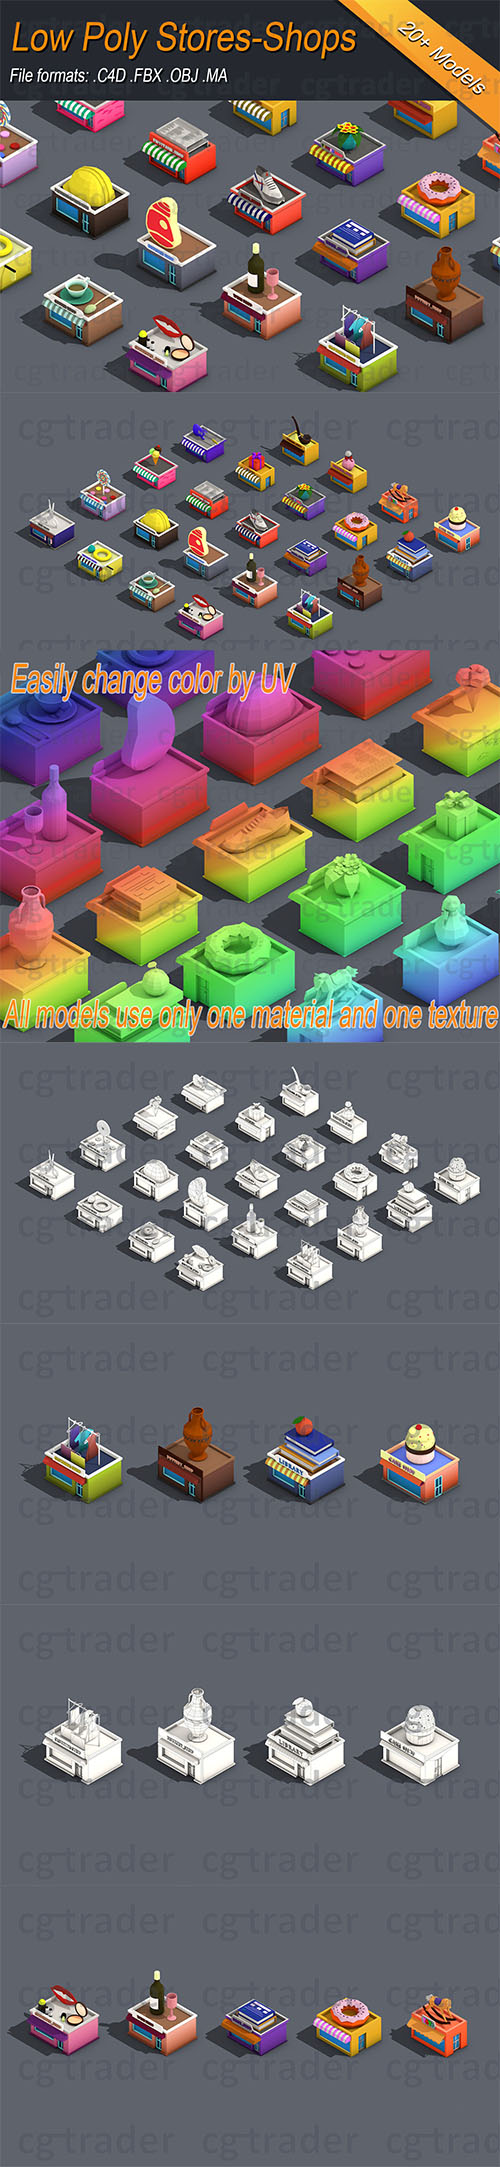 Low poly Stores Shops Isometric Low-poly 3D model